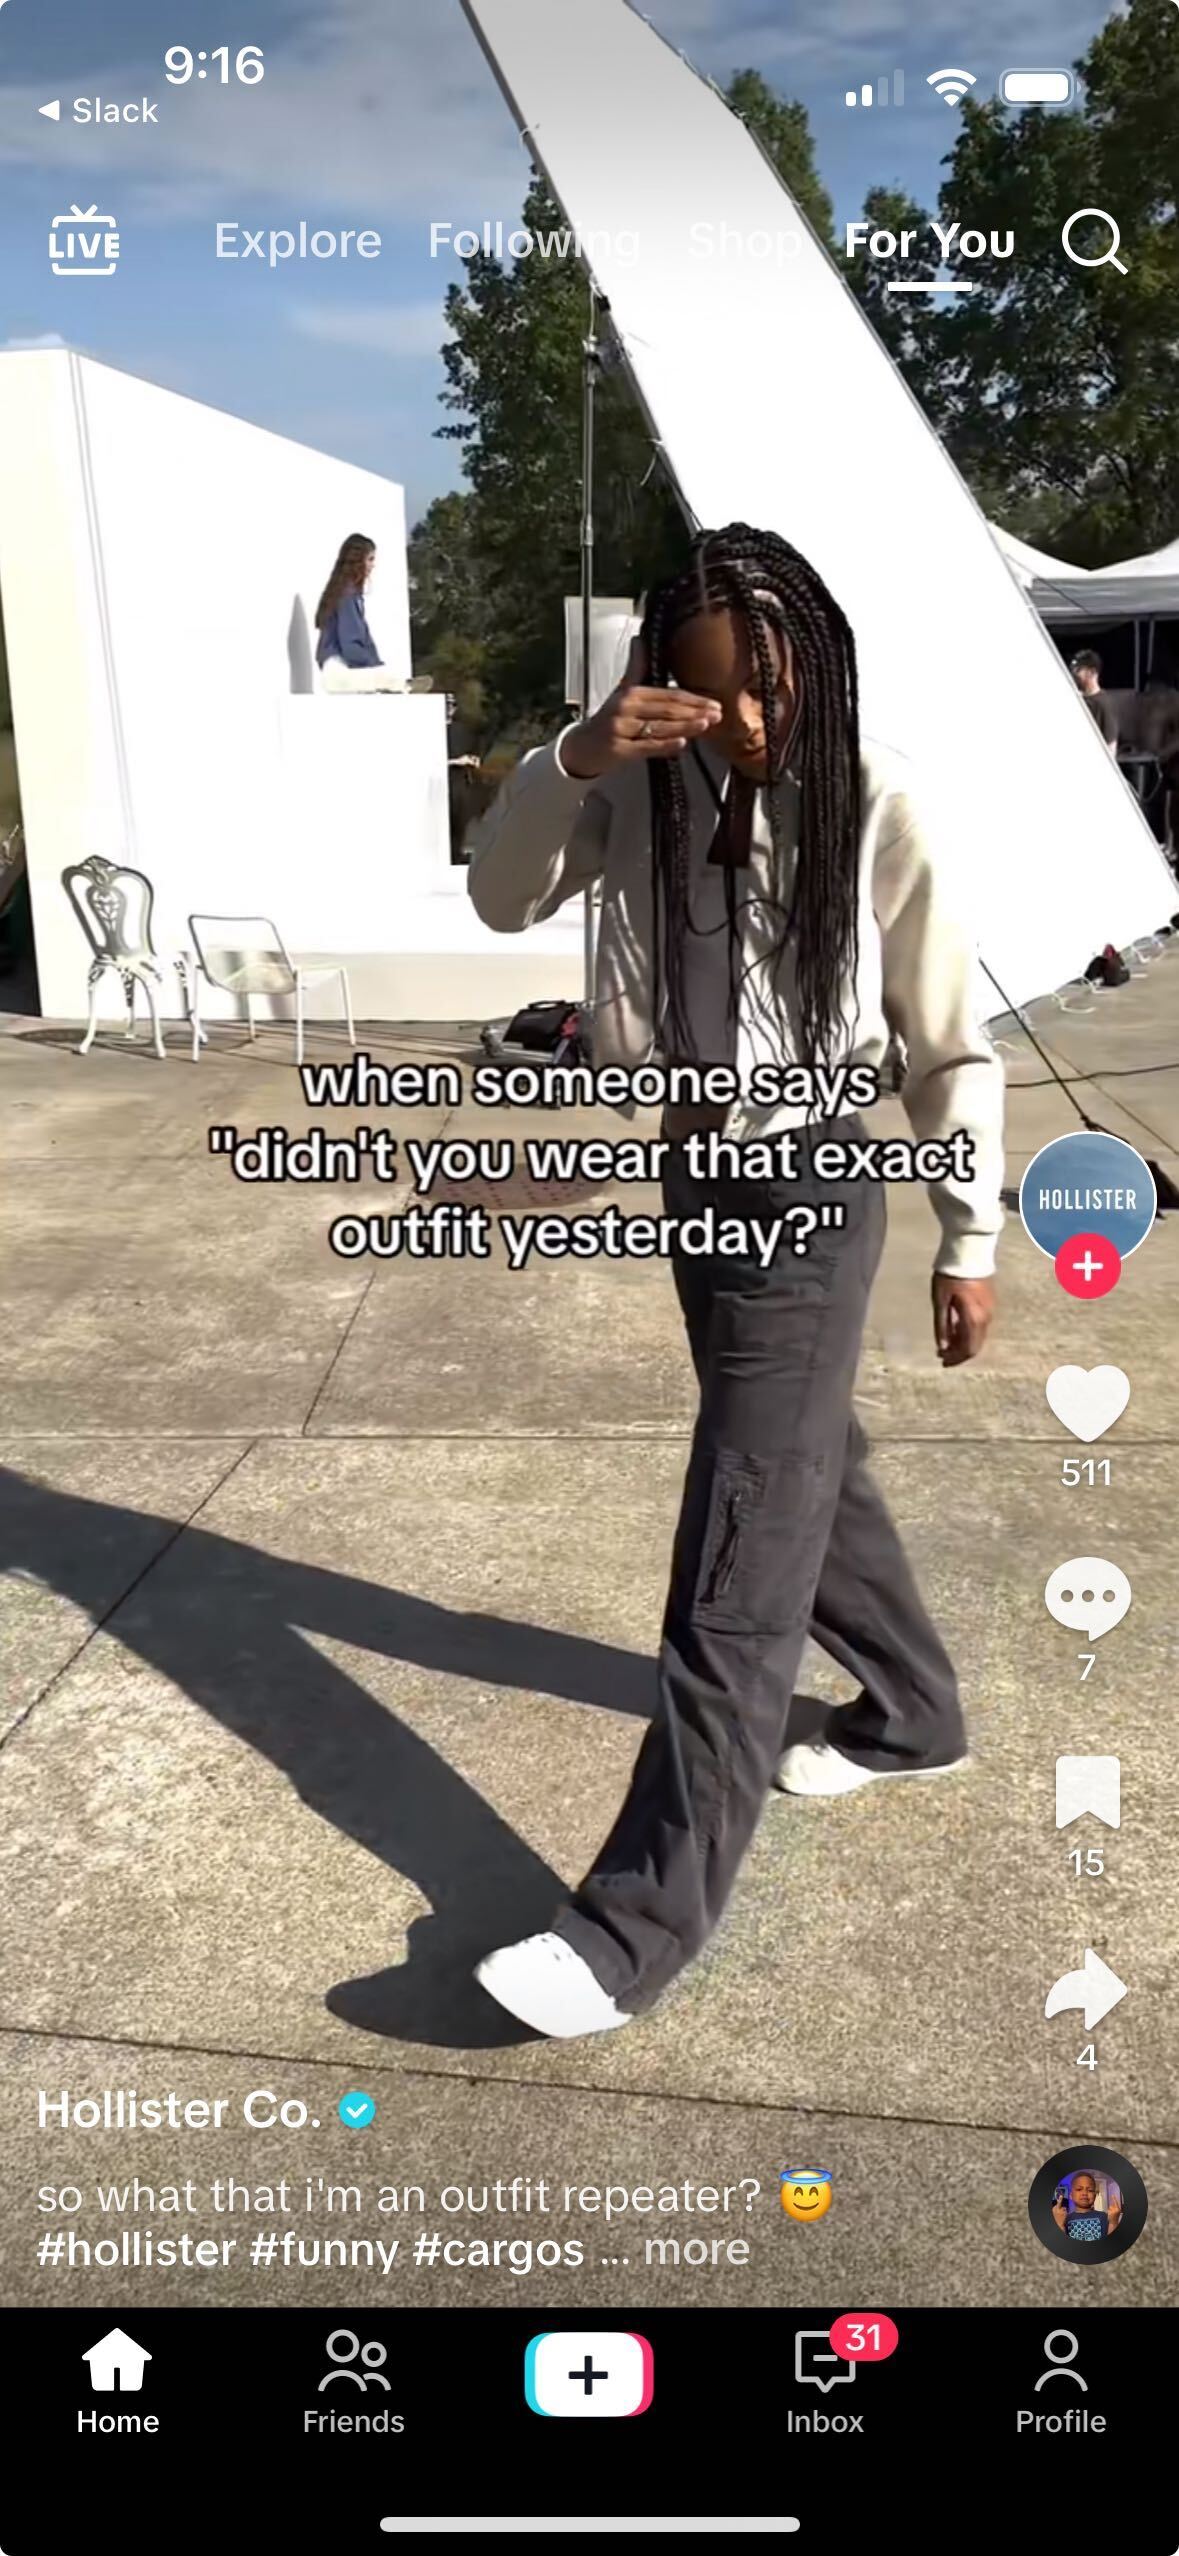 A TikTok shared by Hollister. In the post, a model is covering her face while on the set of a photoshoot. The caption says "When some says "didn't you were that exact outfit yesterday?". 